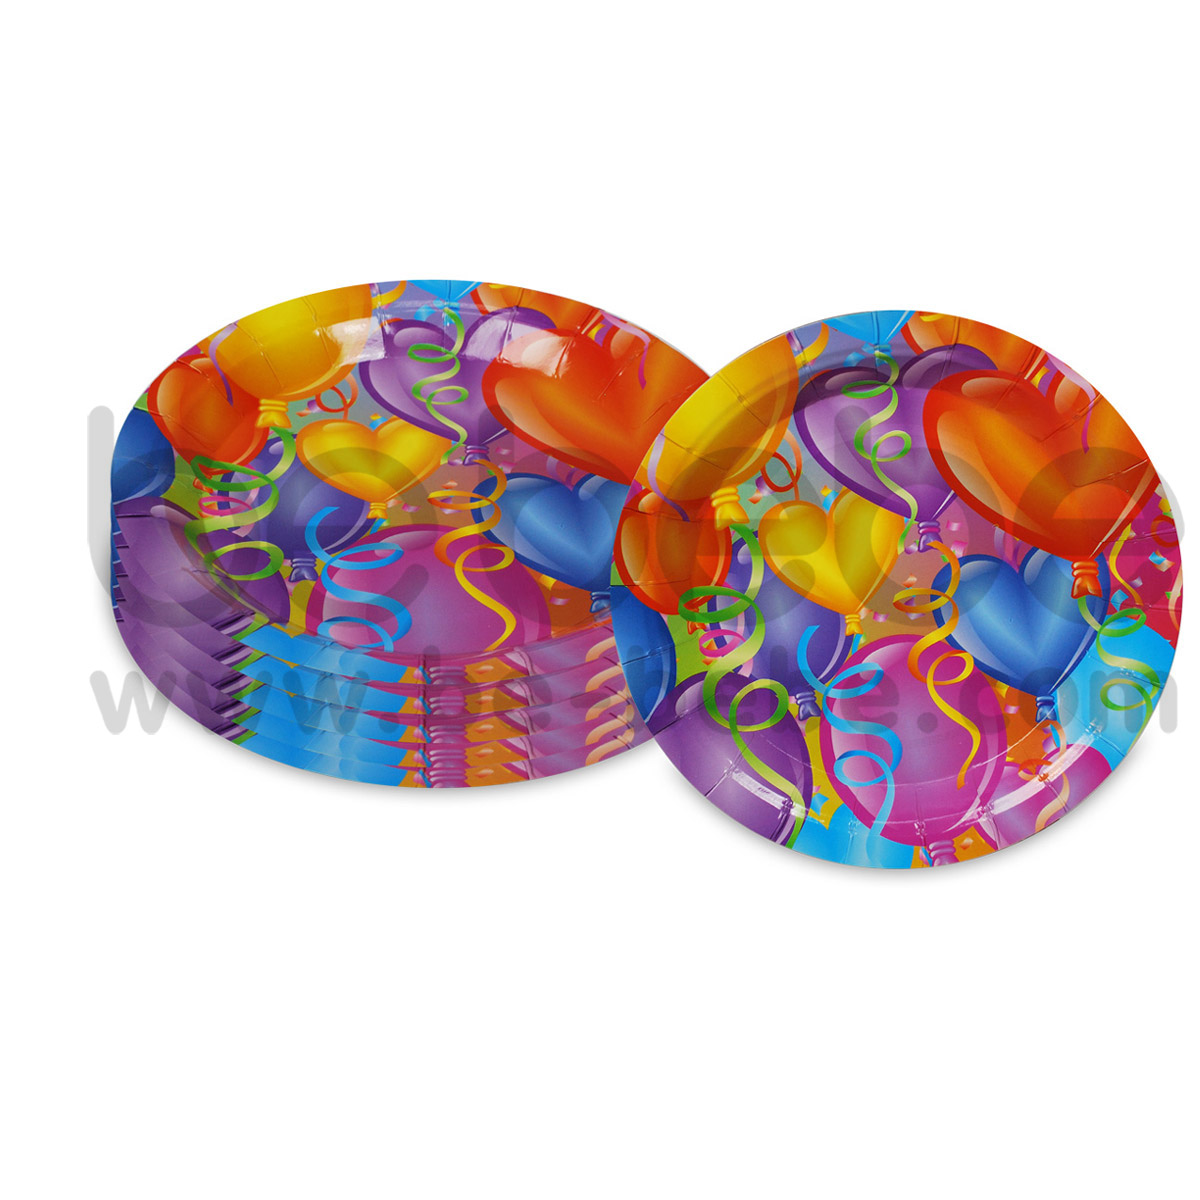 PARTY BUG : Paper plate 9 inch., 1 Pack